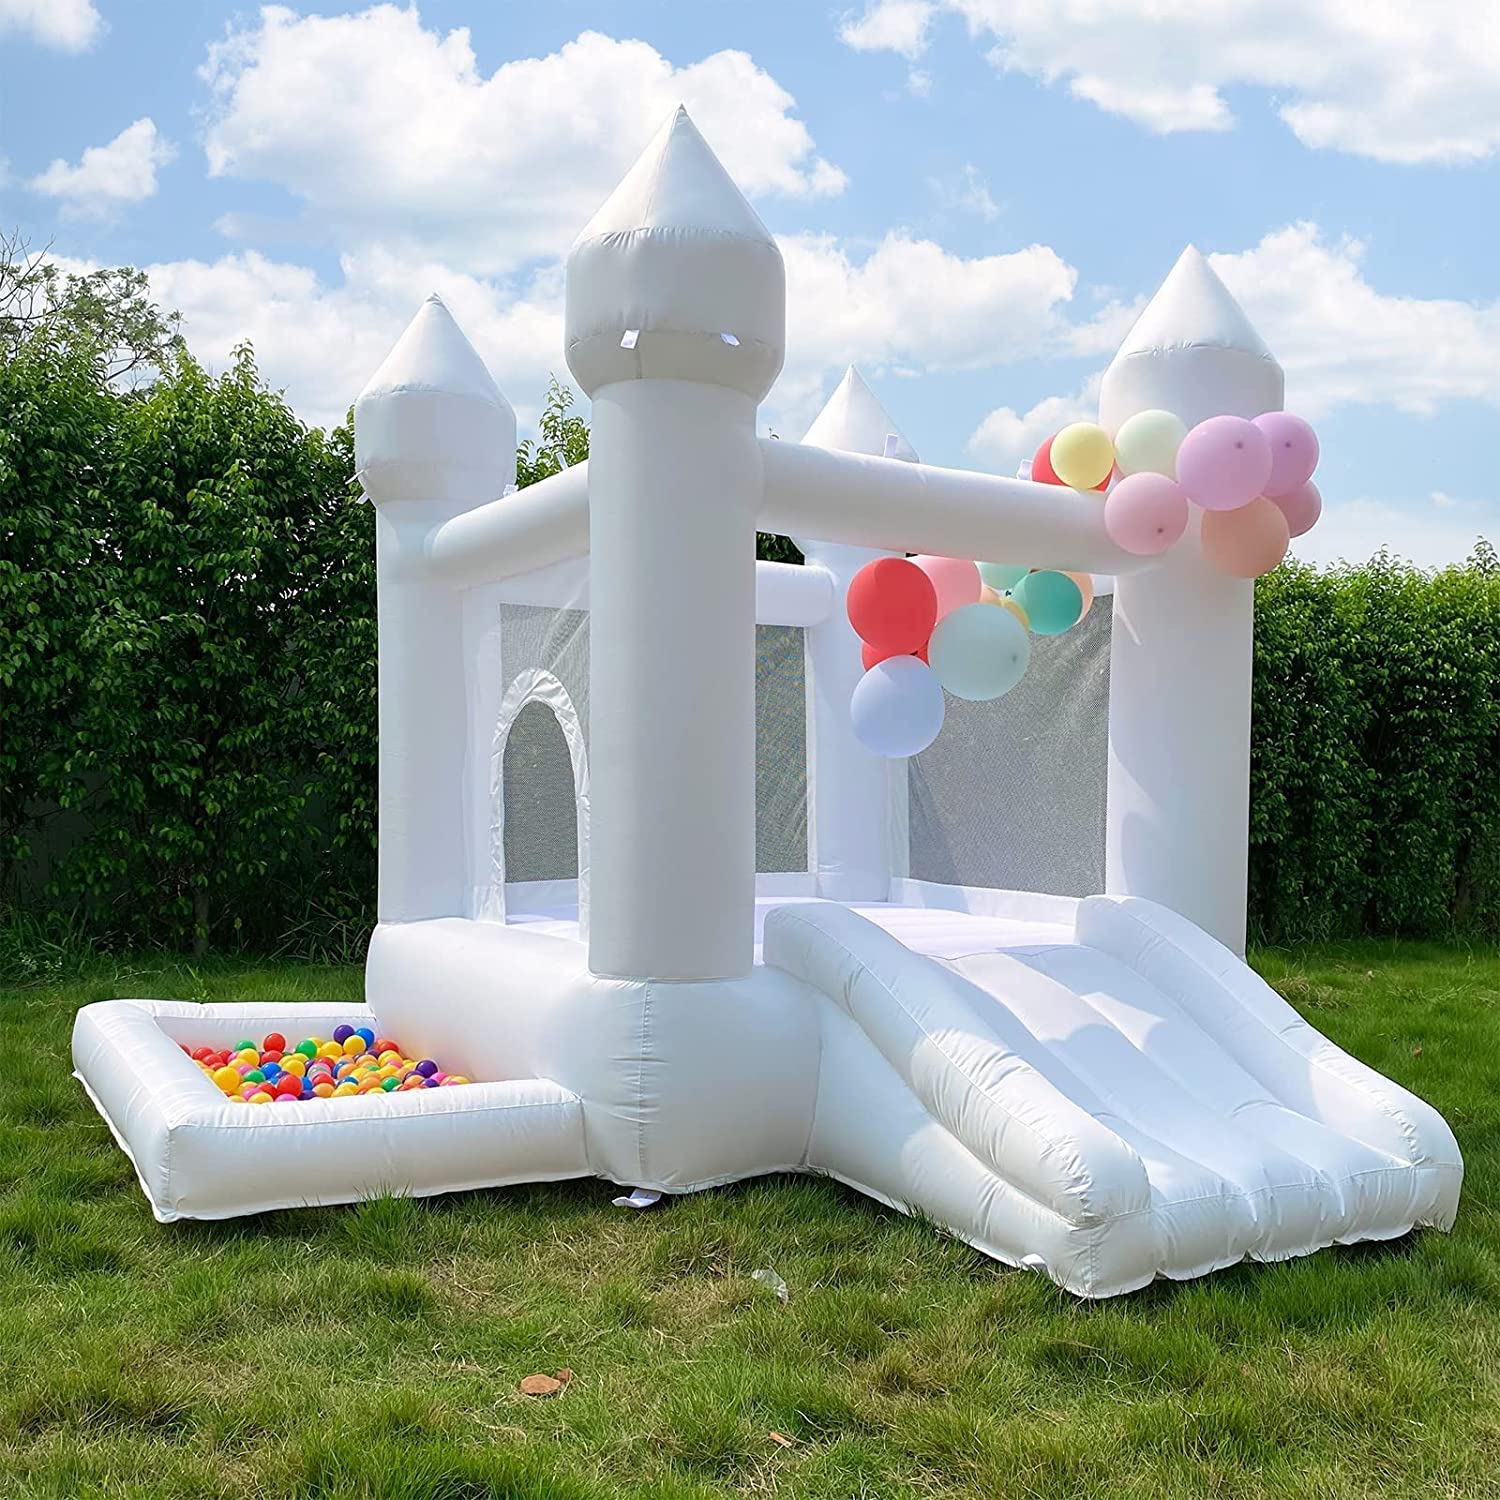 Bouncy house for parties